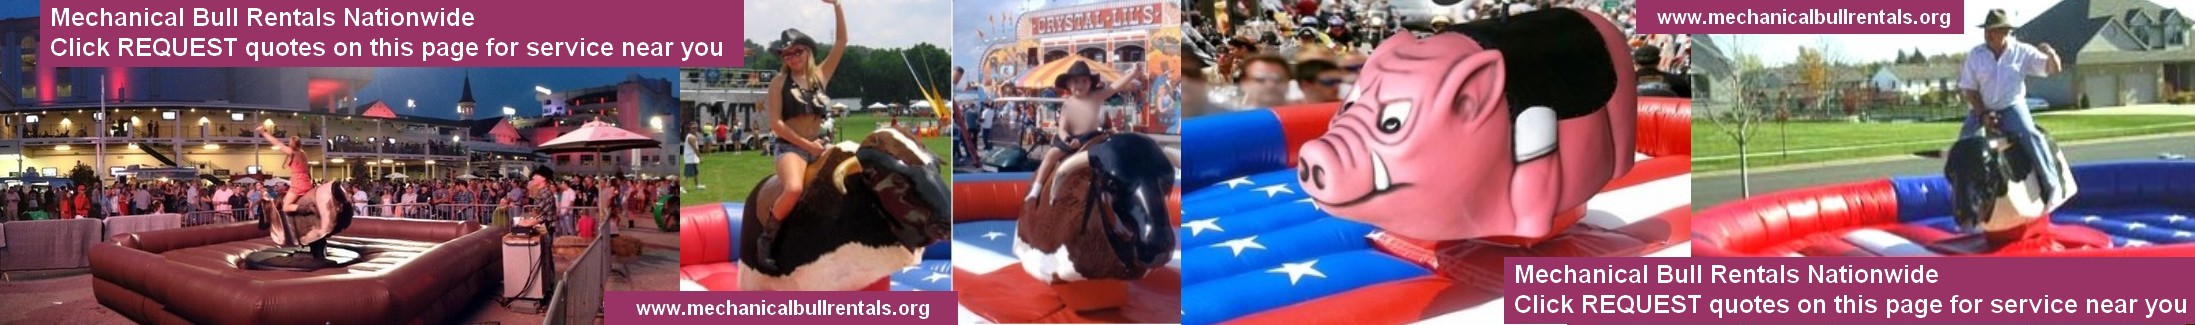 Mechanical Bull Rentals Montgomery County Maryland MD and near you. Free referrals to local mechanical bull companies LOGO